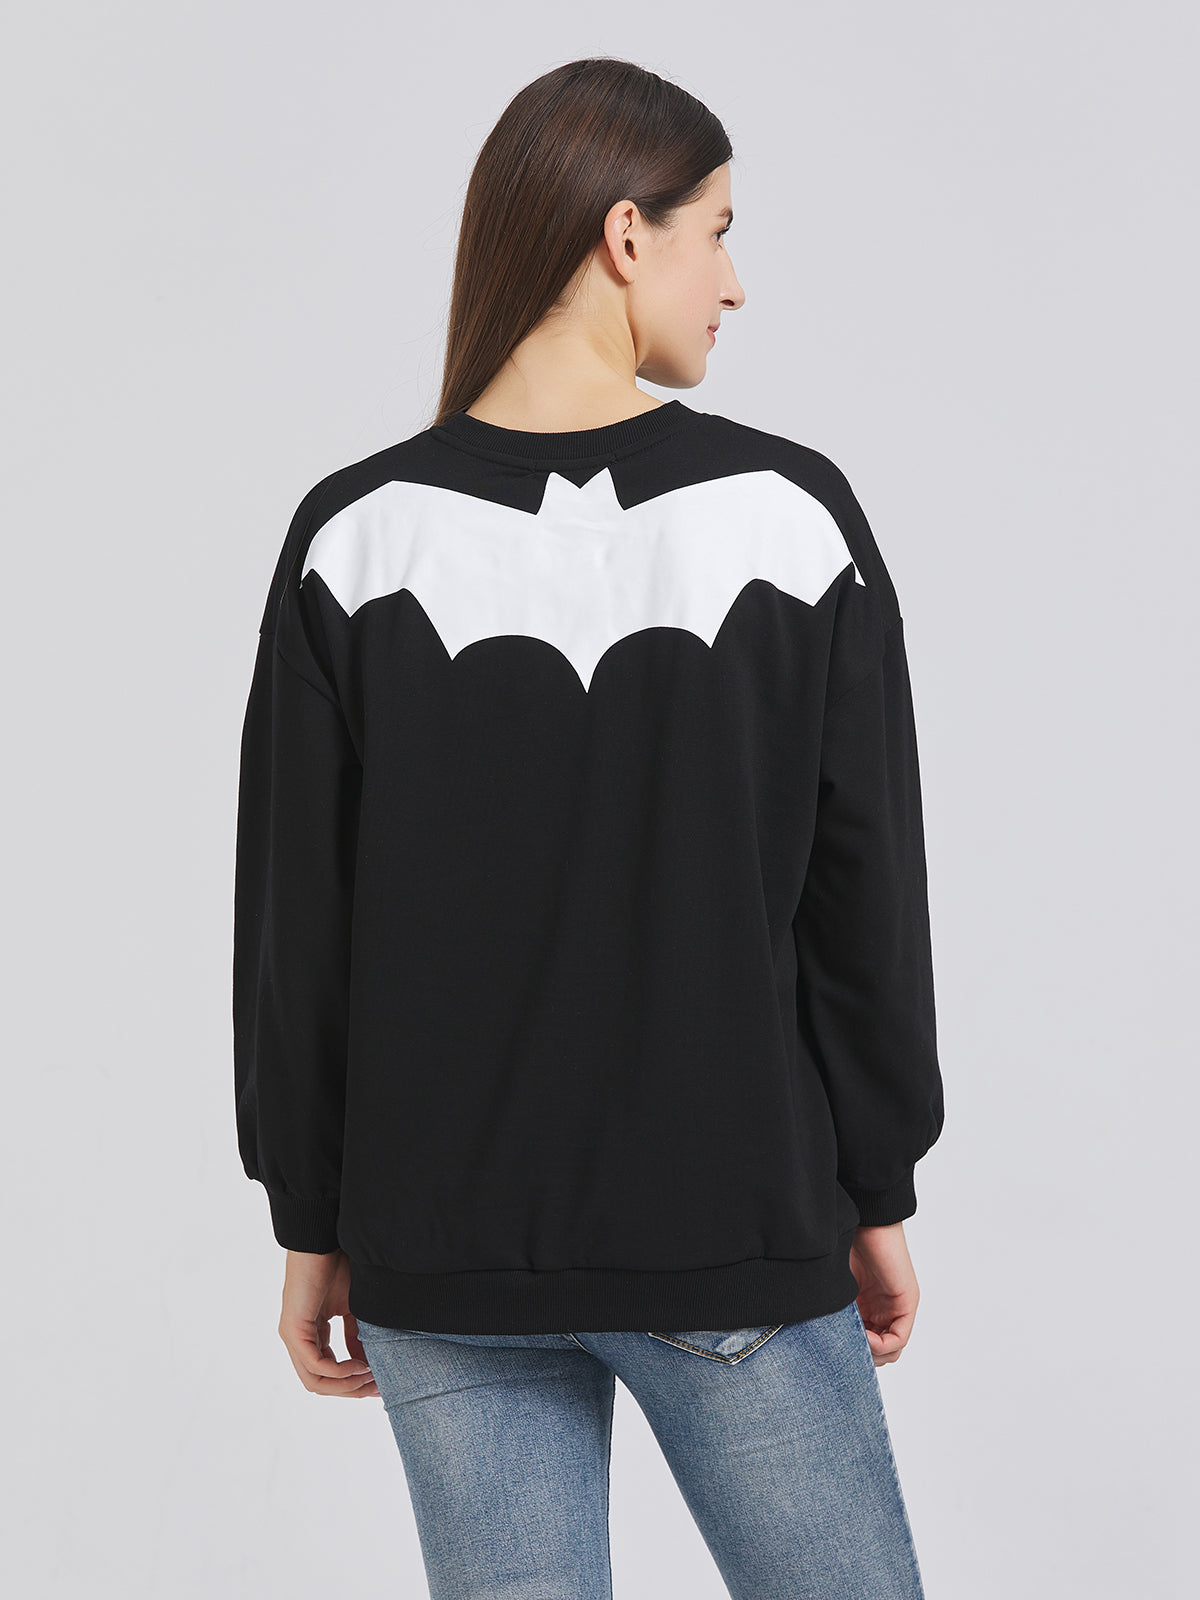 Halloween attire with skull head pattern: Stand out with this fun and festive sweatshirt.